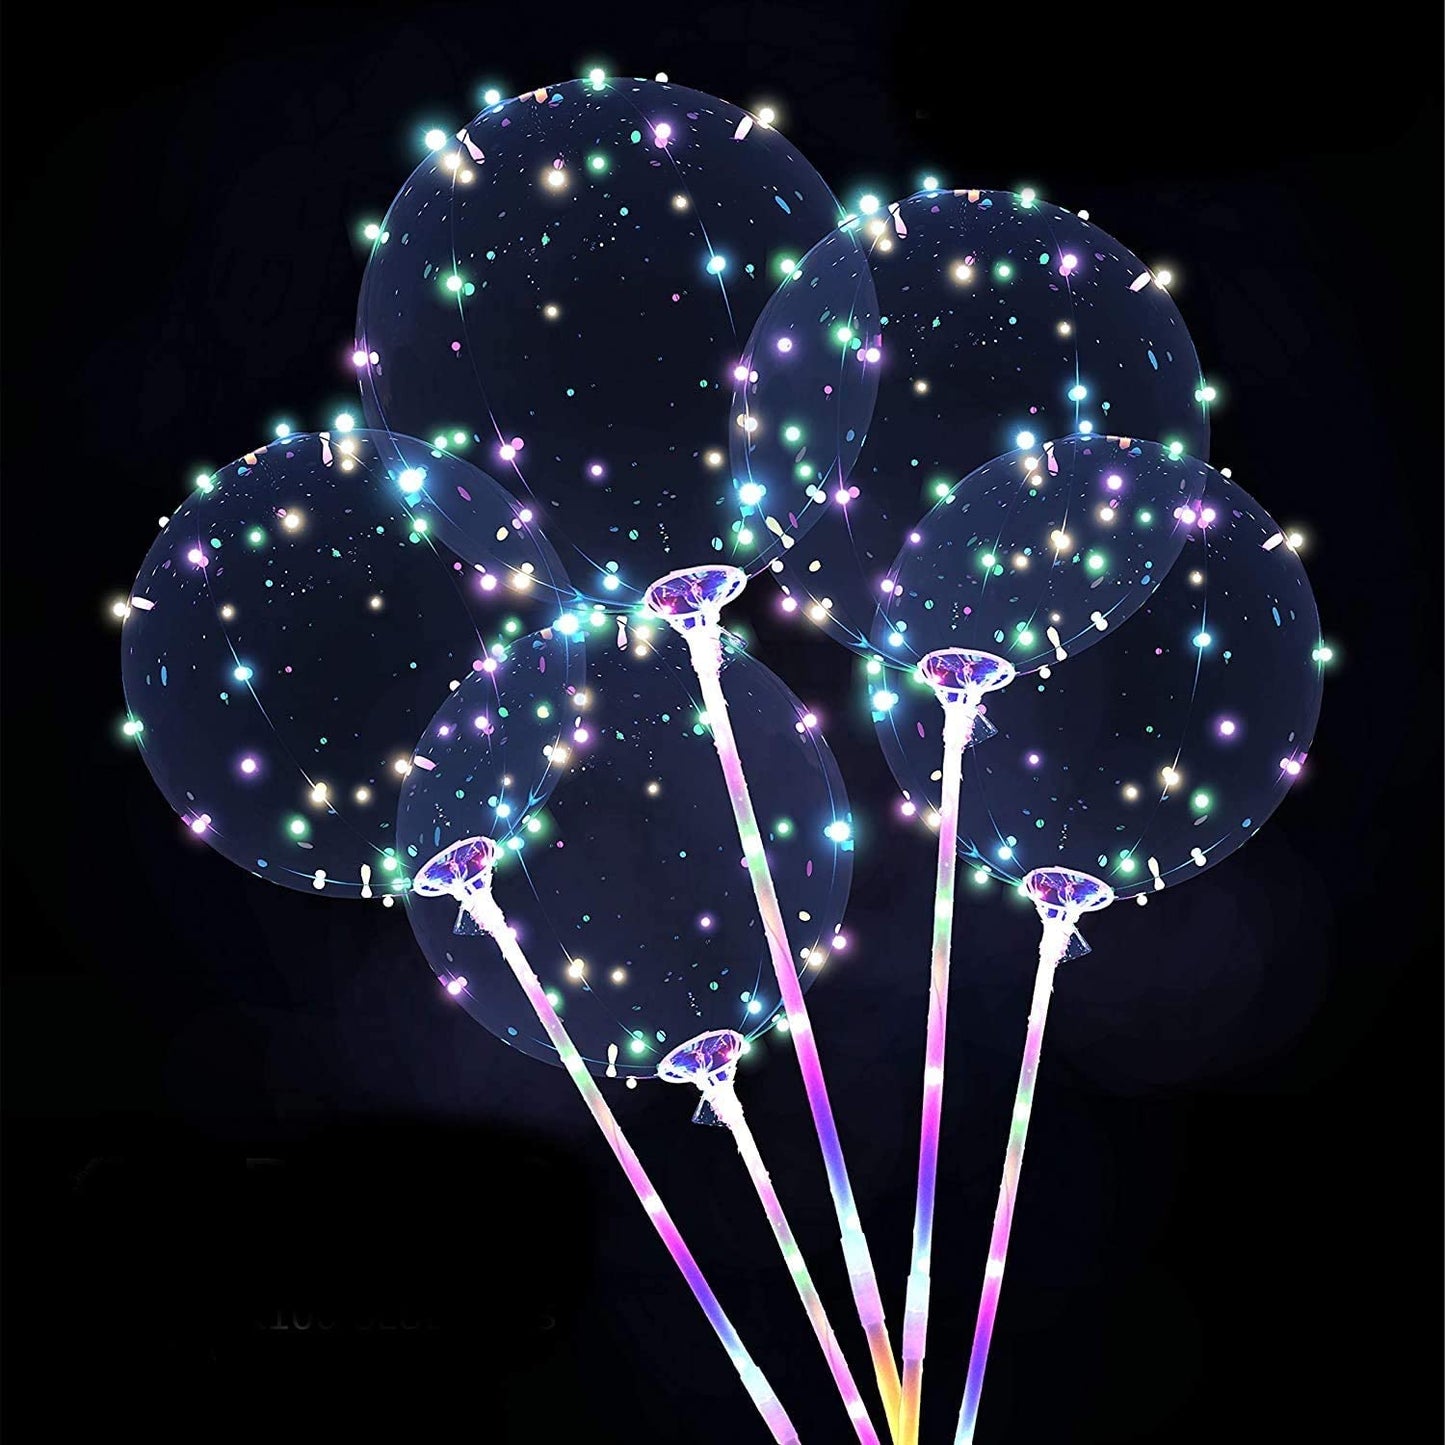 LED Bobo Balloons with Sticks for Weddings, Bridal Showers, Birthdays & More Parties